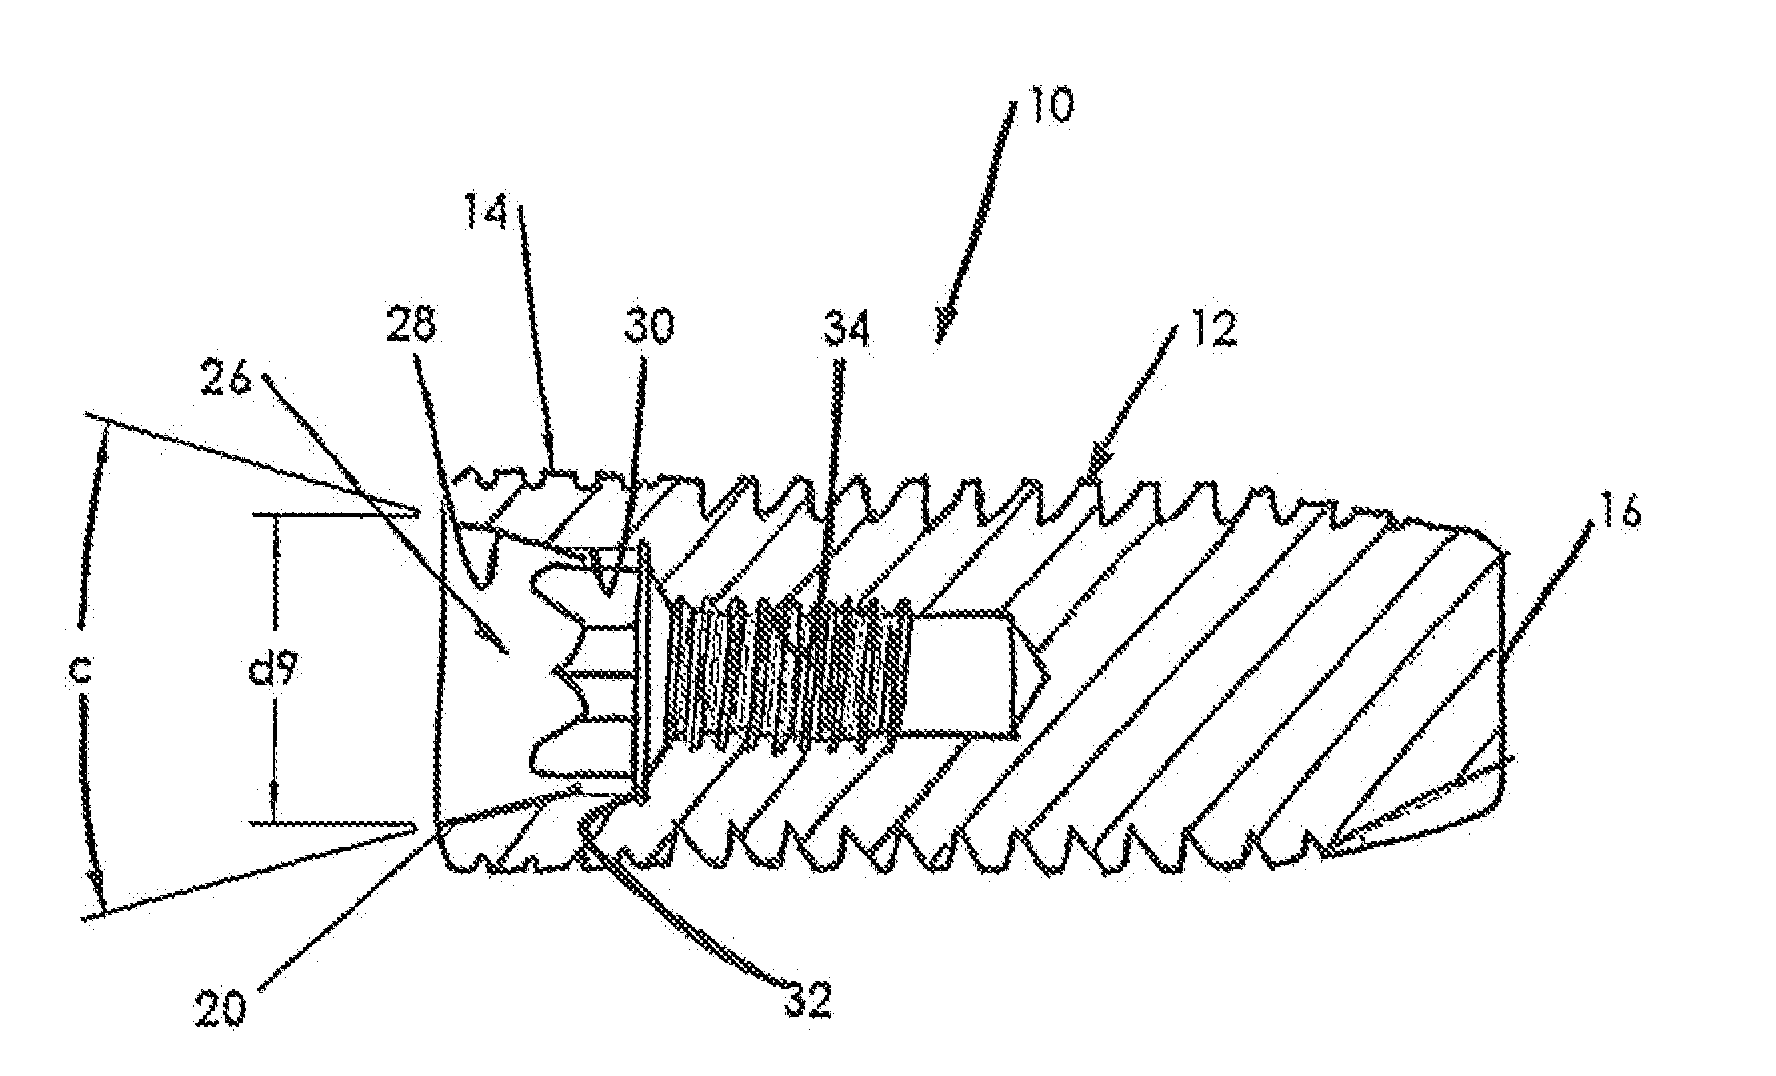 Flexible Abutment For Use With A Dental Implant